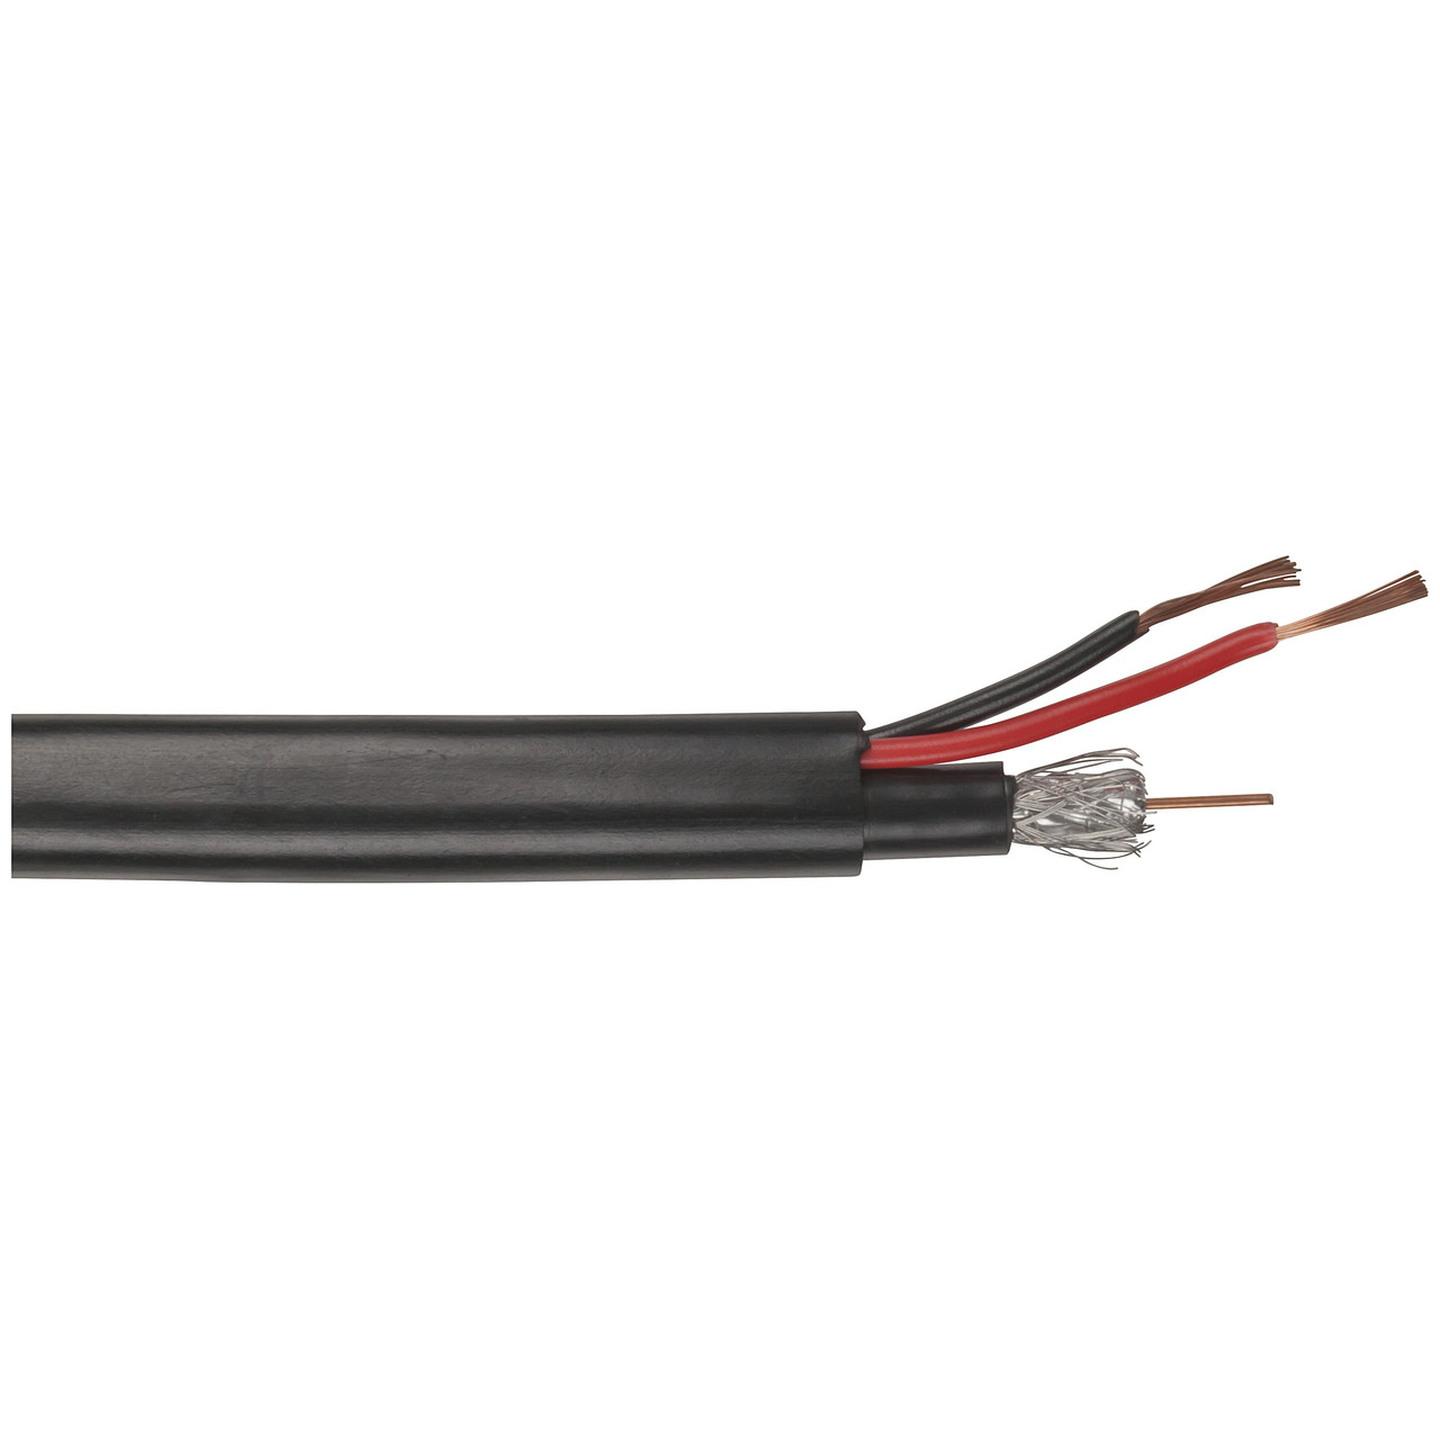 RG59 / Power Cable